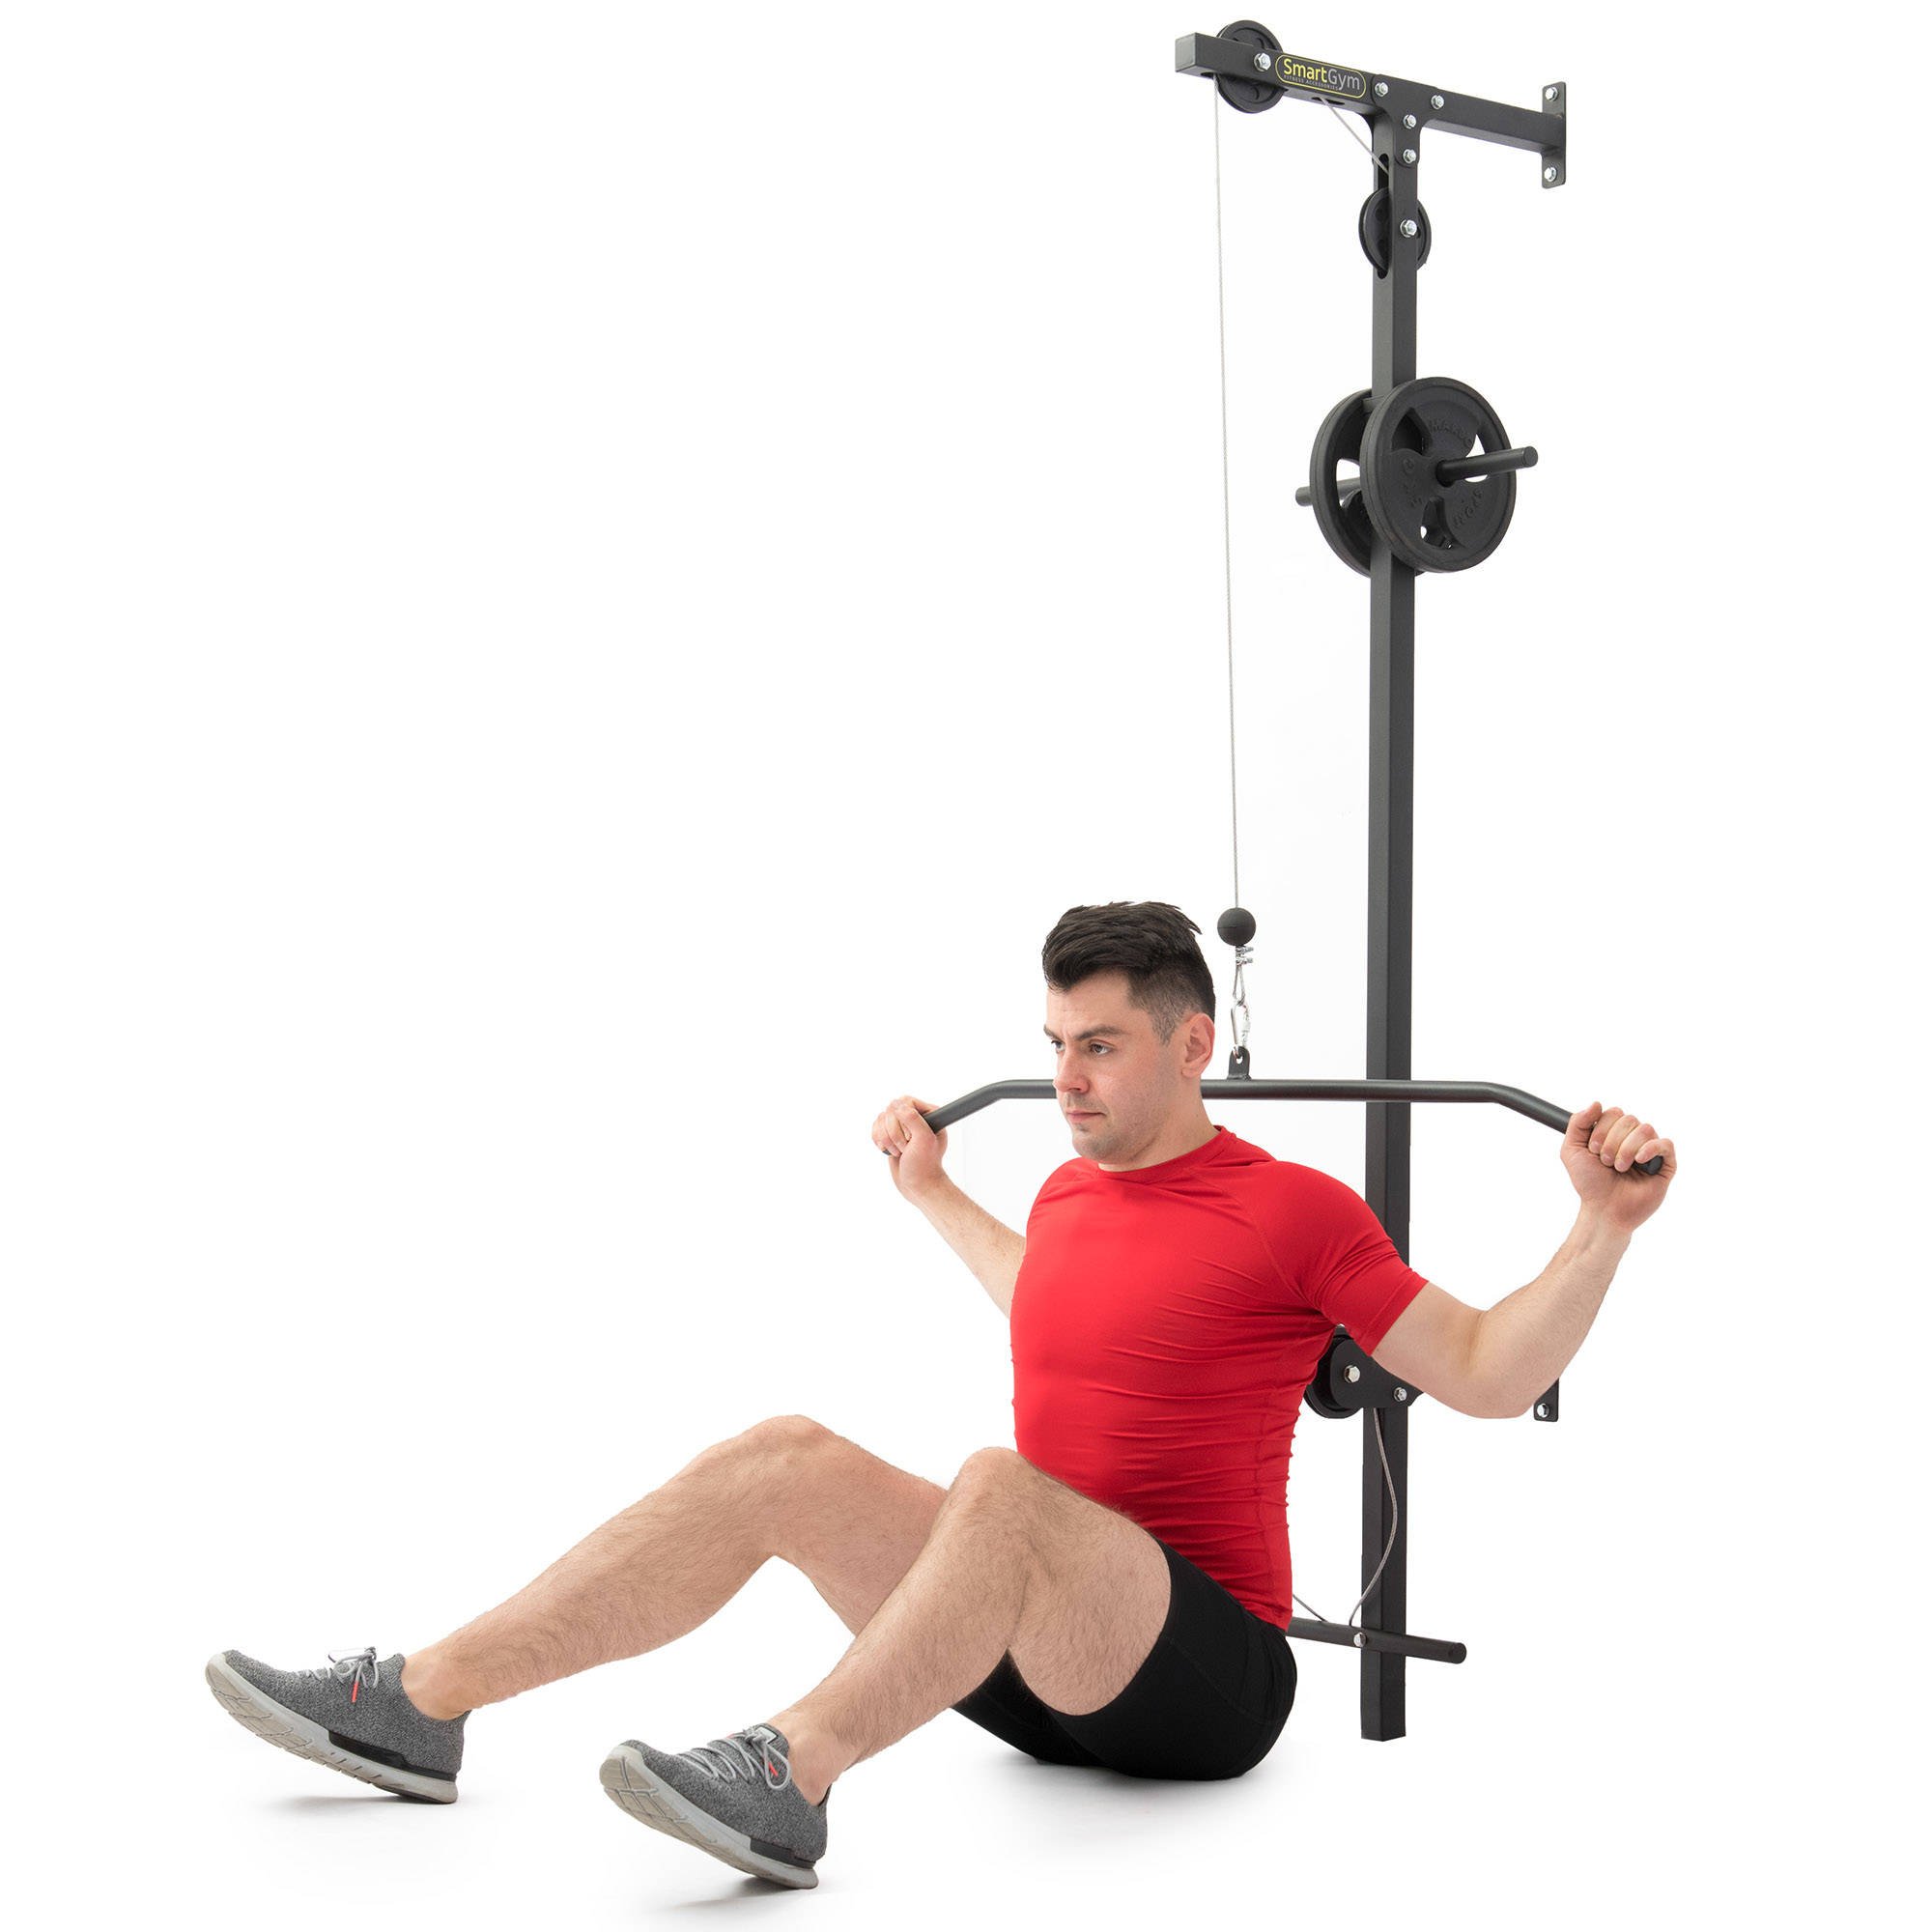 Lat Pulldown Machine Exercises: Attachments and Alternatives